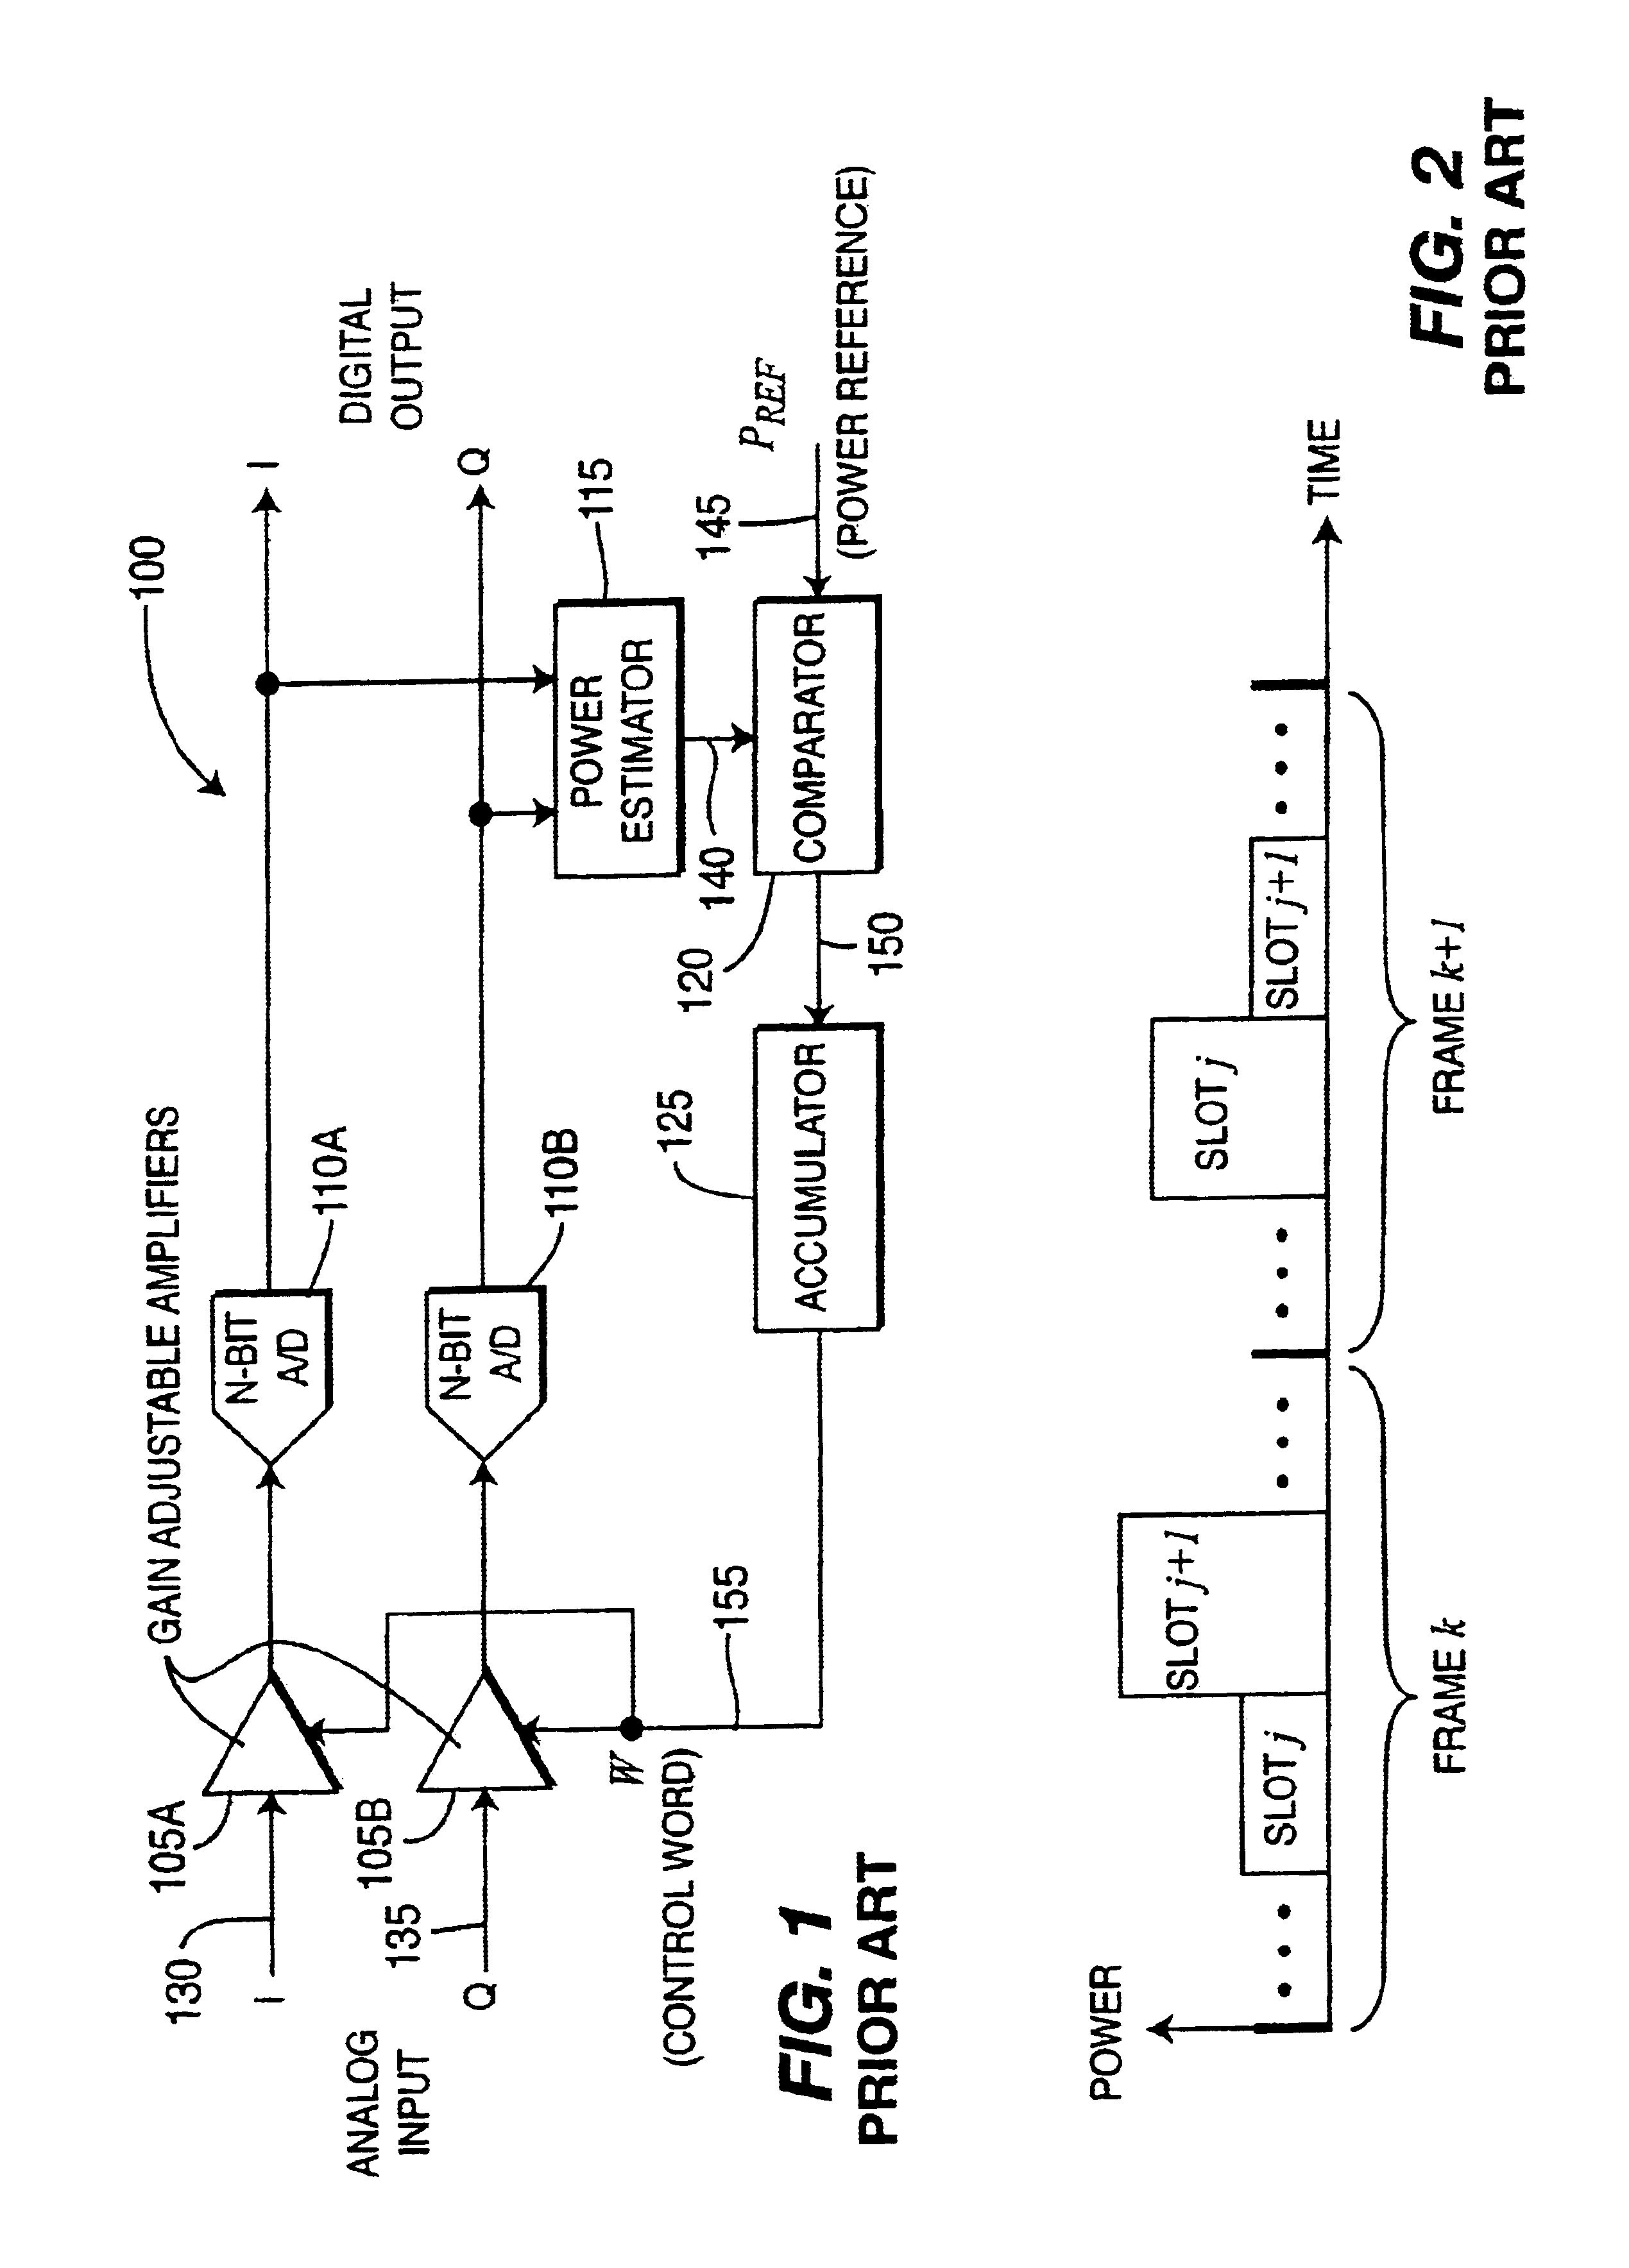 Method and apparatus for estimating and controlling initial time slot gain in a wireless communication system